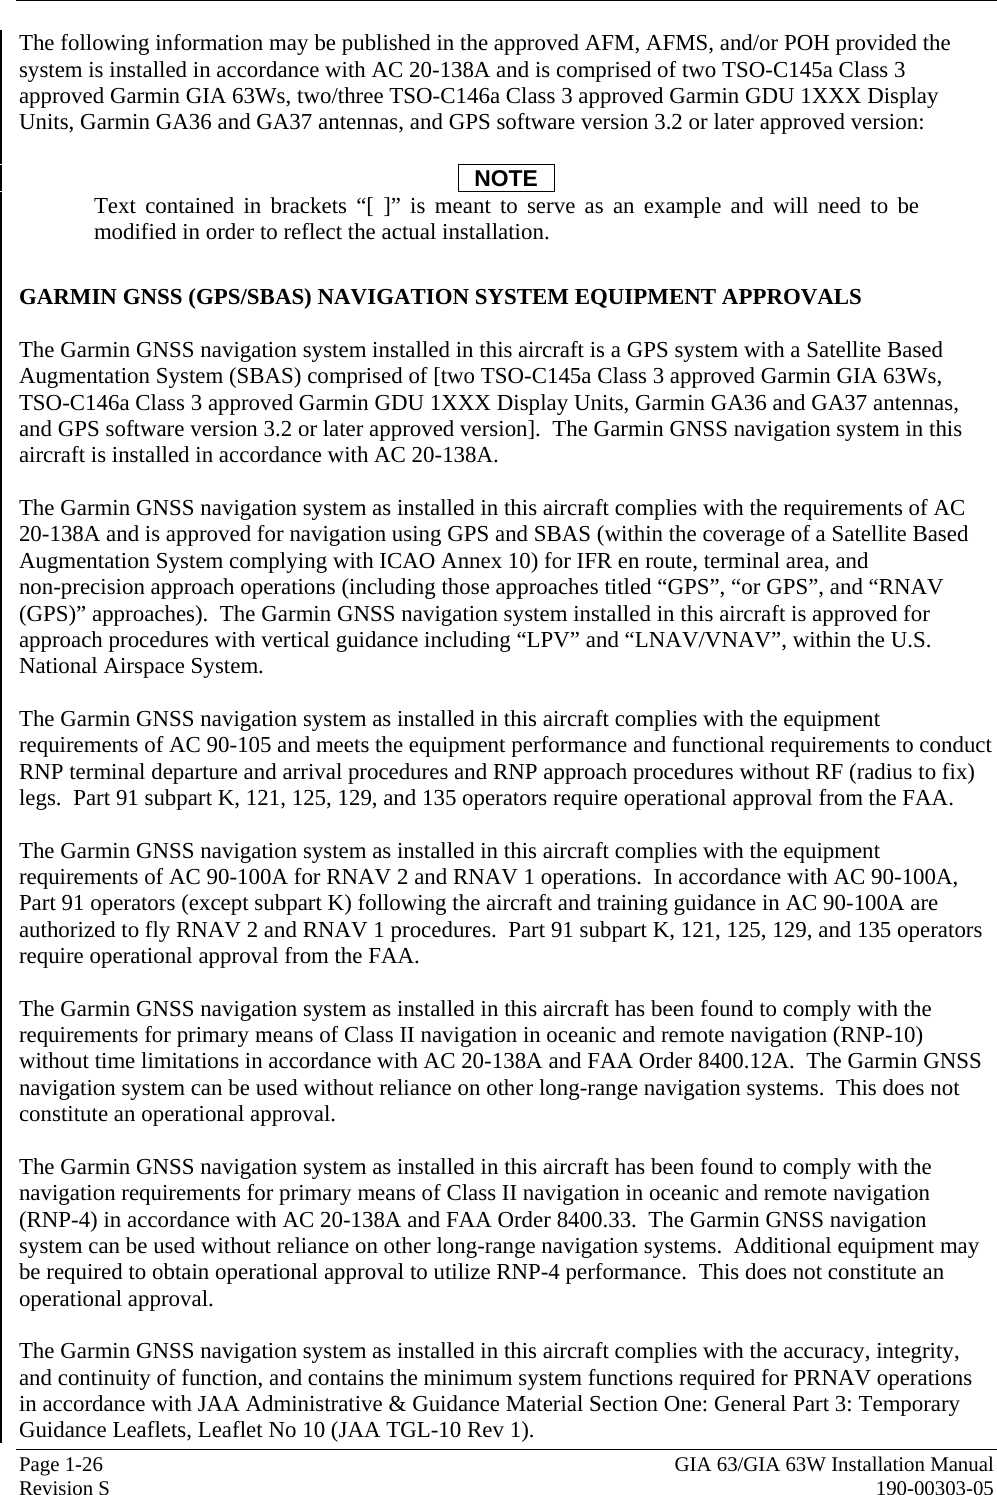  Page 1-26  GIA 63/GIA 63W Installation Manual Revision S  190-00303-05 The following information may be published in the approved AFM, AFMS, and/or POH provided the system is installed in accordance with AC 20-138A and is comprised of two TSO-C145a Class 3 approved Garmin GIA 63Ws, two/three TSO-C146a Class 3 approved Garmin GDU 1XXX Display Units, Garmin GA36 and GA37 antennas, and GPS software version 3.2 or later approved version:  NOTE Text contained in brackets “[ ]” is meant to serve as an example and will need to be modified in order to reflect the actual installation.  GARMIN GNSS (GPS/SBAS) NAVIGATION SYSTEM EQUIPMENT APPROVALS  The Garmin GNSS navigation system installed in this aircraft is a GPS system with a Satellite Based Augmentation System (SBAS) comprised of [two TSO-C145a Class 3 approved Garmin GIA 63Ws, TSO-C146a Class 3 approved Garmin GDU 1XXX Display Units, Garmin GA36 and GA37 antennas, and GPS software version 3.2 or later approved version].  The Garmin GNSS navigation system in this aircraft is installed in accordance with AC 20-138A.  The Garmin GNSS navigation system as installed in this aircraft complies with the requirements of AC 20-138A and is approved for navigation using GPS and SBAS (within the coverage of a Satellite Based Augmentation System complying with ICAO Annex 10) for IFR en route, terminal area, and  non-precision approach operations (including those approaches titled “GPS”, “or GPS”, and “RNAV (GPS)” approaches).  The Garmin GNSS navigation system installed in this aircraft is approved for approach procedures with vertical guidance including “LPV” and “LNAV/VNAV”, within the U.S. National Airspace System.  The Garmin GNSS navigation system as installed in this aircraft complies with the equipment requirements of AC 90-105 and meets the equipment performance and functional requirements to conduct RNP terminal departure and arrival procedures and RNP approach procedures without RF (radius to fix) legs.  Part 91 subpart K, 121, 125, 129, and 135 operators require operational approval from the FAA.  The Garmin GNSS navigation system as installed in this aircraft complies with the equipment requirements of AC 90-100A for RNAV 2 and RNAV 1 operations.  In accordance with AC 90-100A, Part 91 operators (except subpart K) following the aircraft and training guidance in AC 90-100A are authorized to fly RNAV 2 and RNAV 1 procedures.  Part 91 subpart K, 121, 125, 129, and 135 operators require operational approval from the FAA.  The Garmin GNSS navigation system as installed in this aircraft has been found to comply with the requirements for primary means of Class II navigation in oceanic and remote navigation (RNP-10) without time limitations in accordance with AC 20-138A and FAA Order 8400.12A.  The Garmin GNSS navigation system can be used without reliance on other long-range navigation systems.  This does not constitute an operational approval.  The Garmin GNSS navigation system as installed in this aircraft has been found to comply with the navigation requirements for primary means of Class II navigation in oceanic and remote navigation (RNP-4) in accordance with AC 20-138A and FAA Order 8400.33.  The Garmin GNSS navigation system can be used without reliance on other long-range navigation systems.  Additional equipment may be required to obtain operational approval to utilize RNP-4 performance.  This does not constitute an operational approval.  The Garmin GNSS navigation system as installed in this aircraft complies with the accuracy, integrity, and continuity of function, and contains the minimum system functions required for PRNAV operations in accordance with JAA Administrative &amp; Guidance Material Section One: General Part 3: Temporary Guidance Leaflets, Leaflet No 10 (JAA TGL-10 Rev 1).   